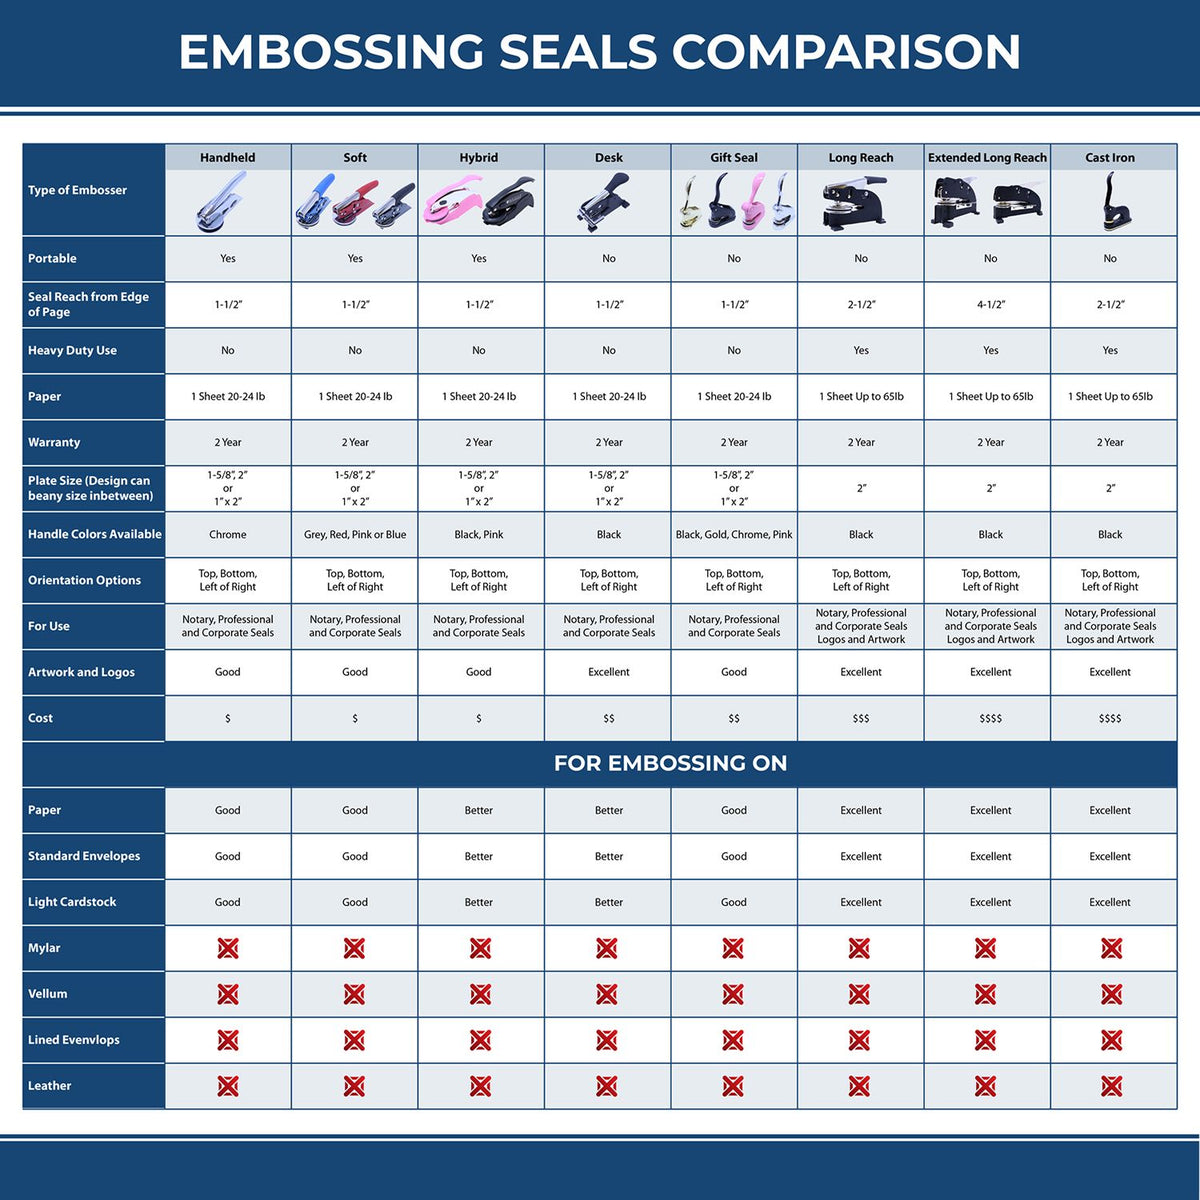 A comparison chart for the different types of mount models available for the Gift Maine Land Surveyor Seal